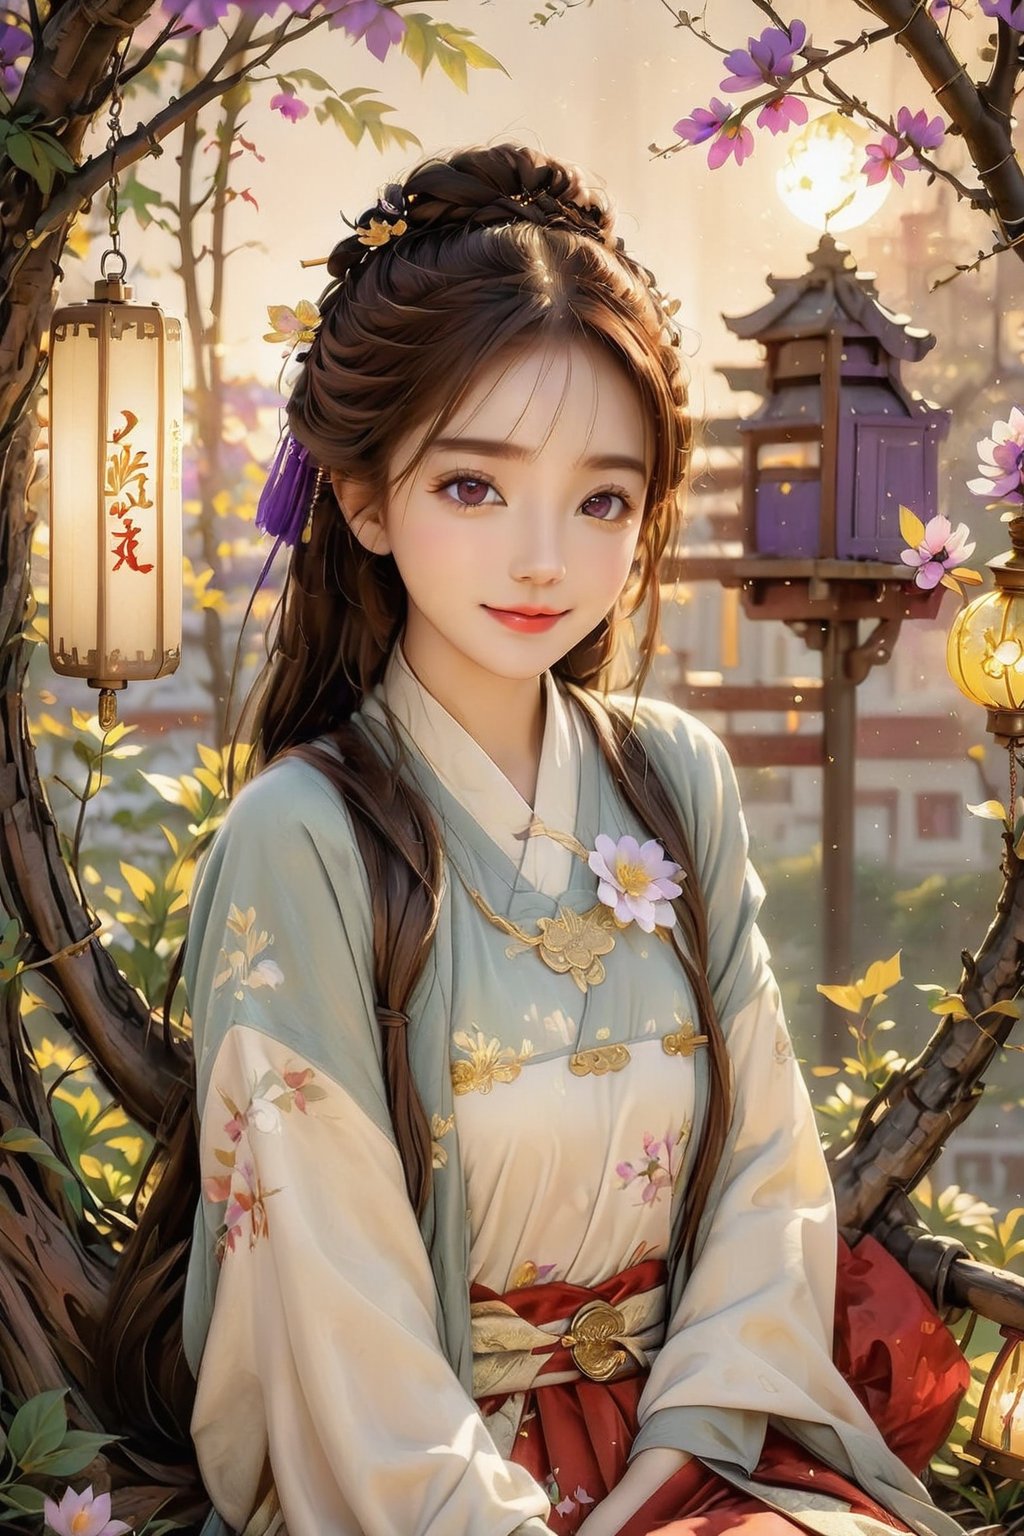 Beautiful 1girl, ((12 years old)), (masterpiece, top quality, best quality, official art, beautiful and aesthetic:1.2), (executoner), extreme detailed, colorful, highest detailed ((ultra-detailed)), (highly detailed CG illustration), ((an extremely delicate and beautiful)), cinematic light, niji style, Chinese house style, in the morning light, maple tree bloom, sunray through the leaves, beautiful eyes, ((light brown eyes)), perfect face, smiling happily, 32k ultra high definition, Pixar movie scene style, realistic high quality Portrait photography, eternal beauty, the lantern behind her emits a soft light, beautiful and dreamy, the flowers are in bloom, and the light bokeh serves as the background, (bronze eyes:1.4), ((purple and yellow hues)), cute animal winterhanfu, holding object, funny pose, (sitting on a tree swing:1.5)